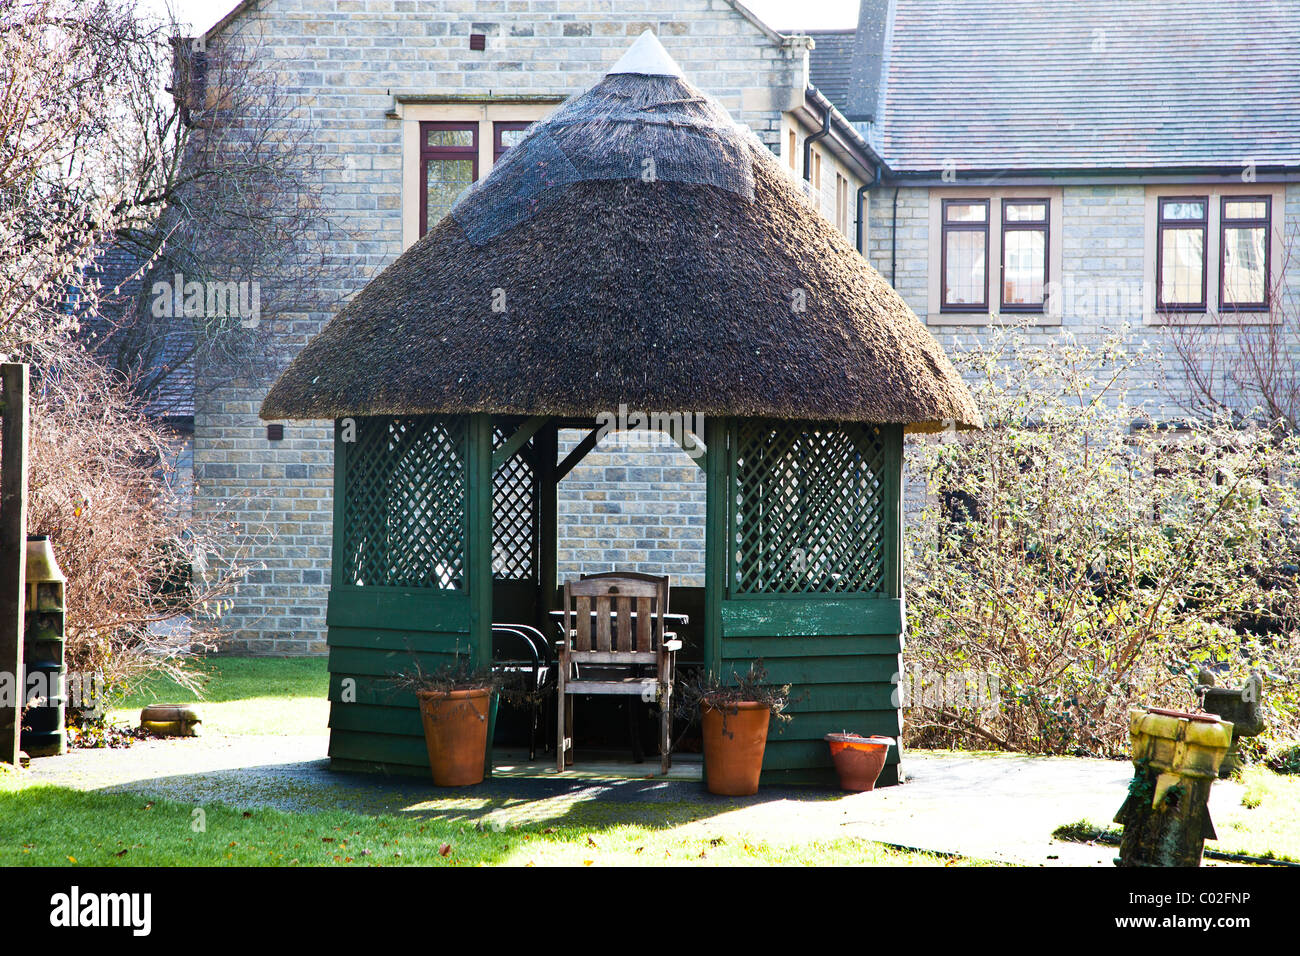 Thatched summerhouse in an English town garden Stock Photo